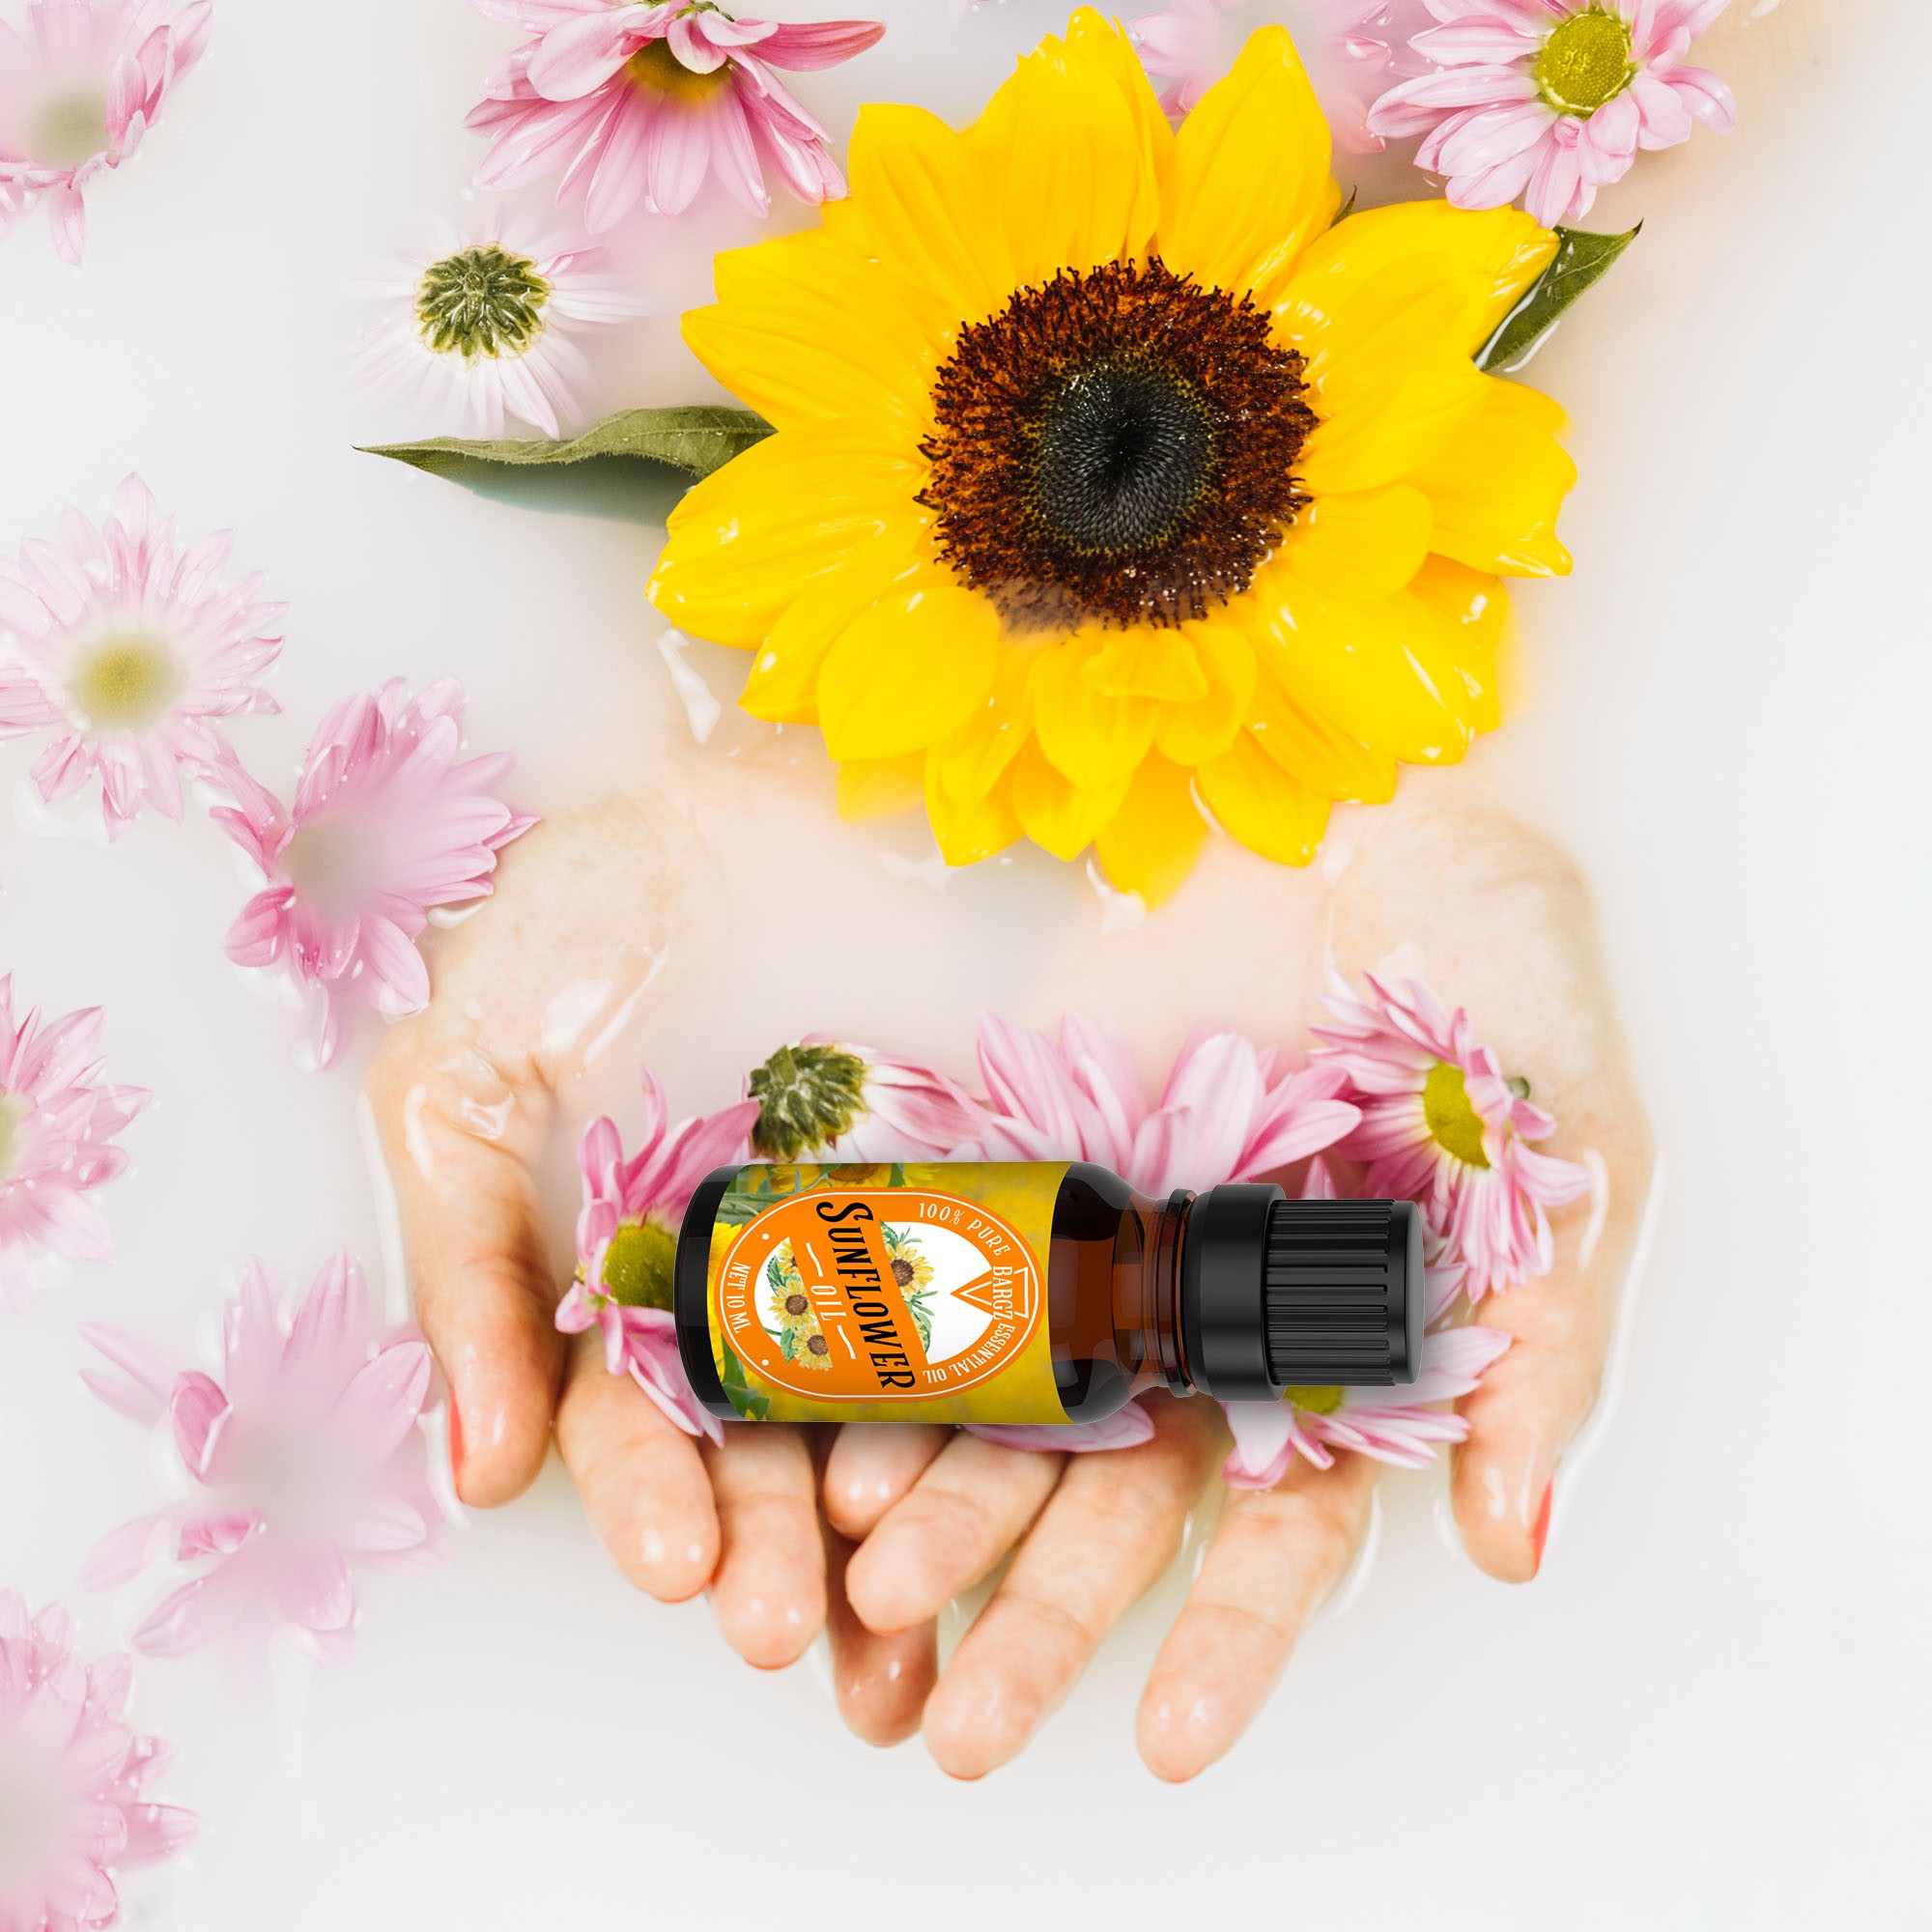 Benefits of using Sunflower Essential Oil